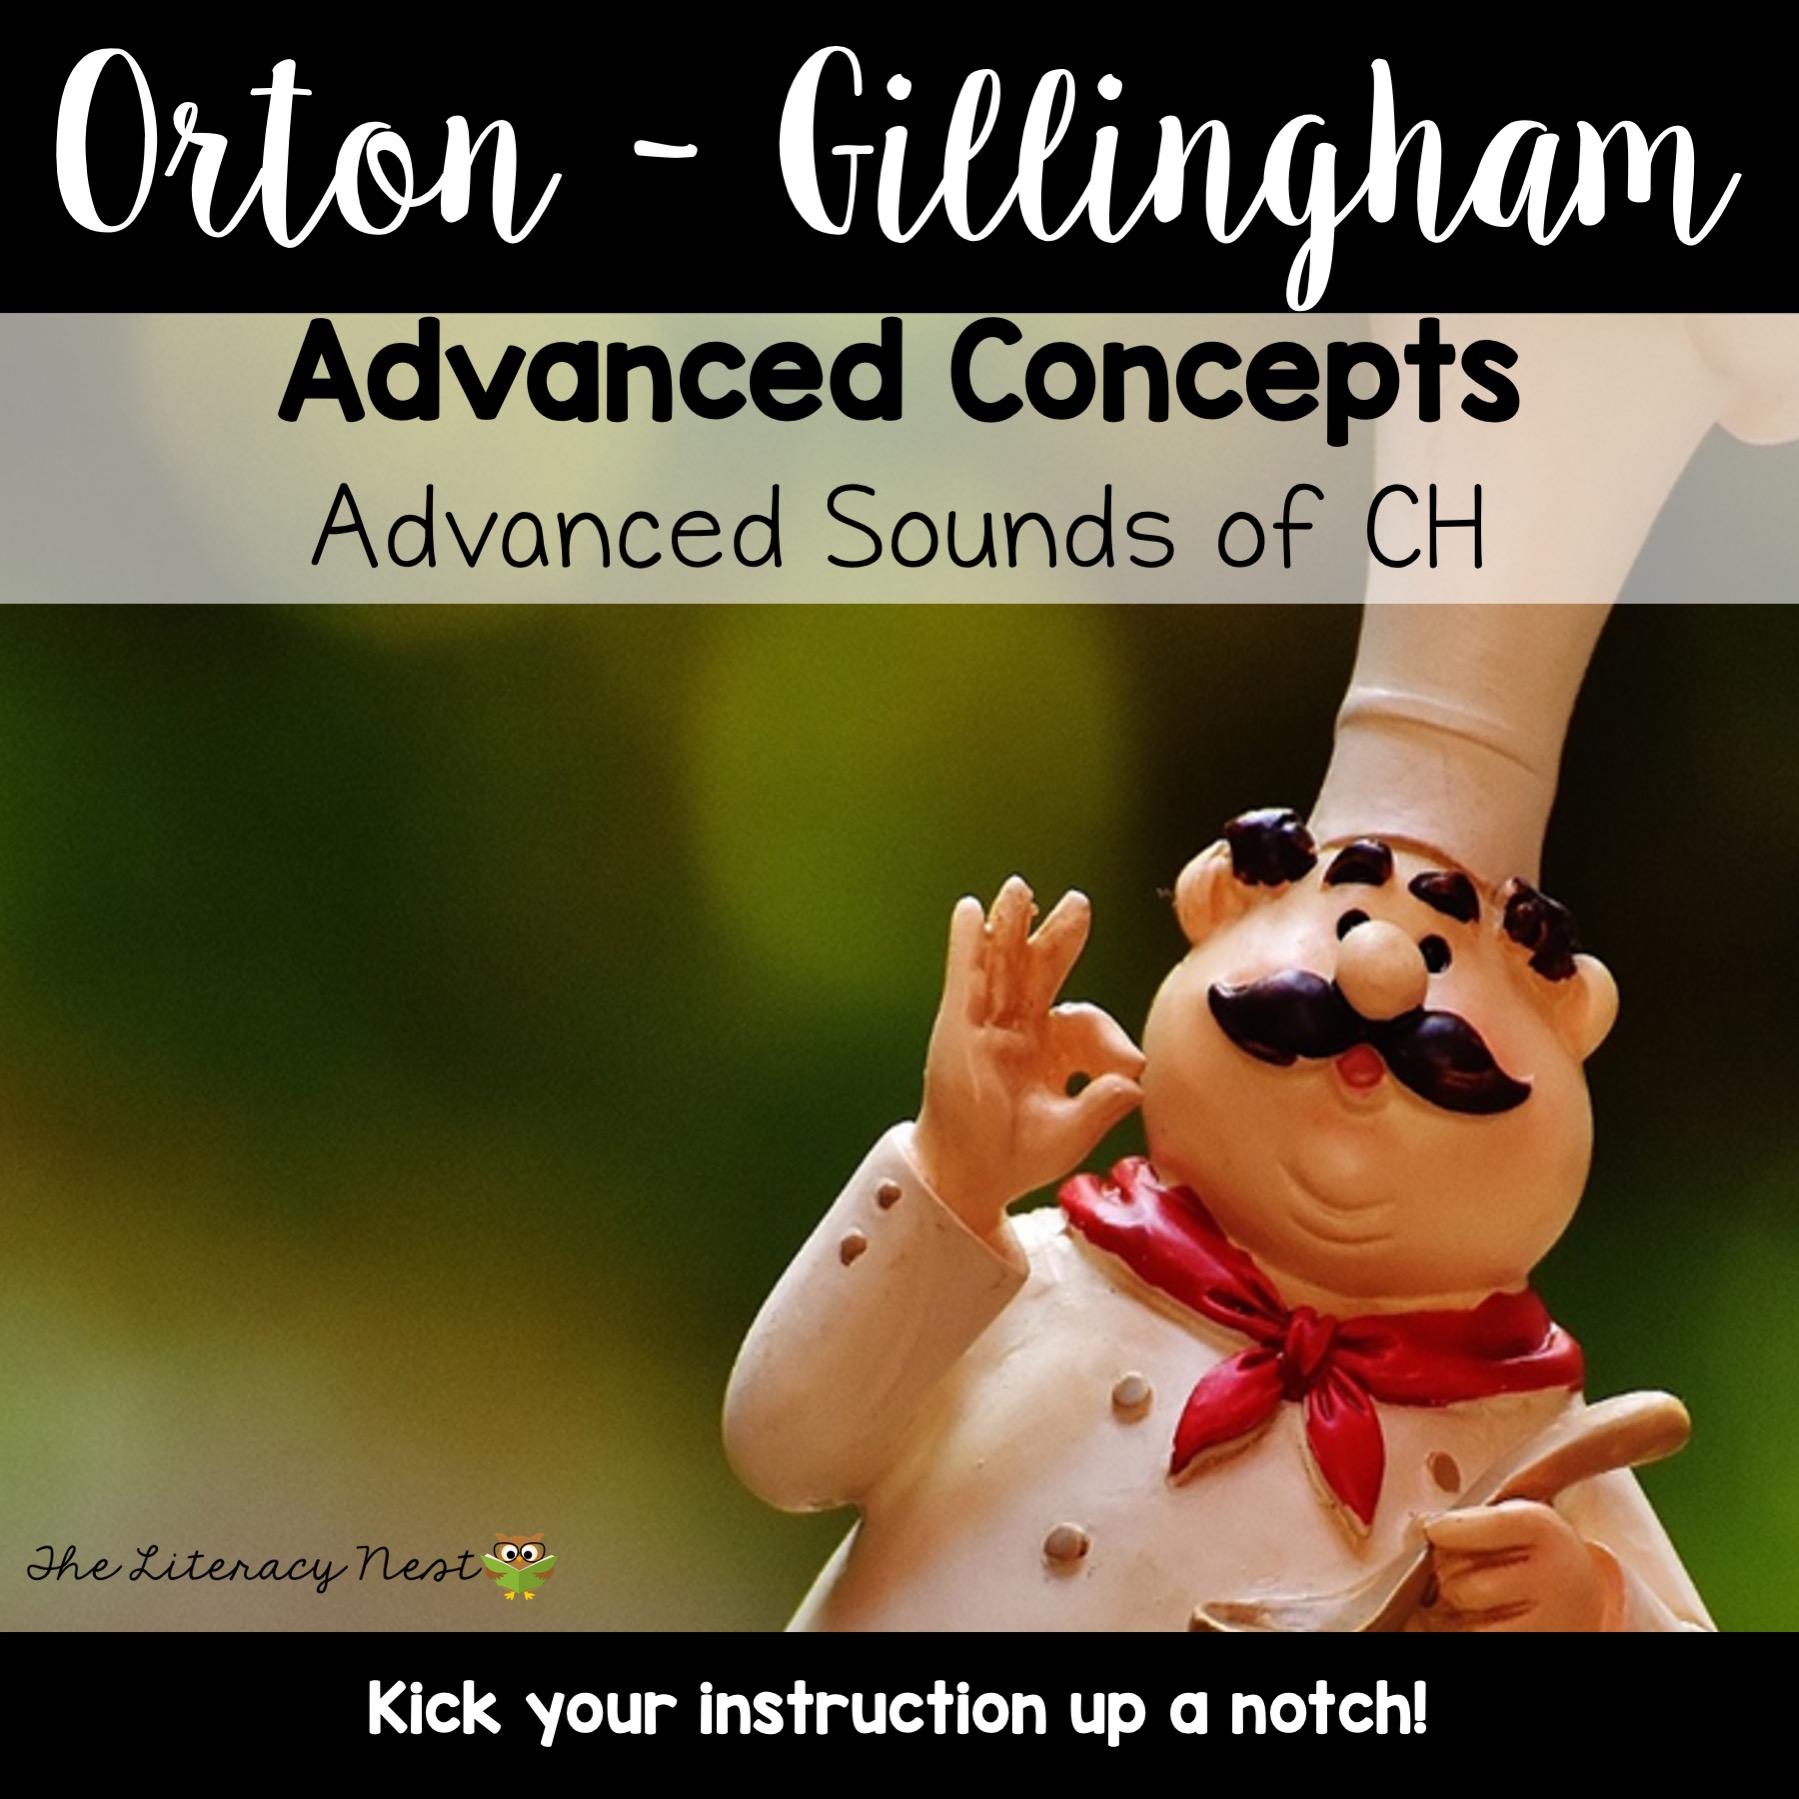 advanced-orton-gillingham-activities-for-sounds-of-ch-word-list-builder